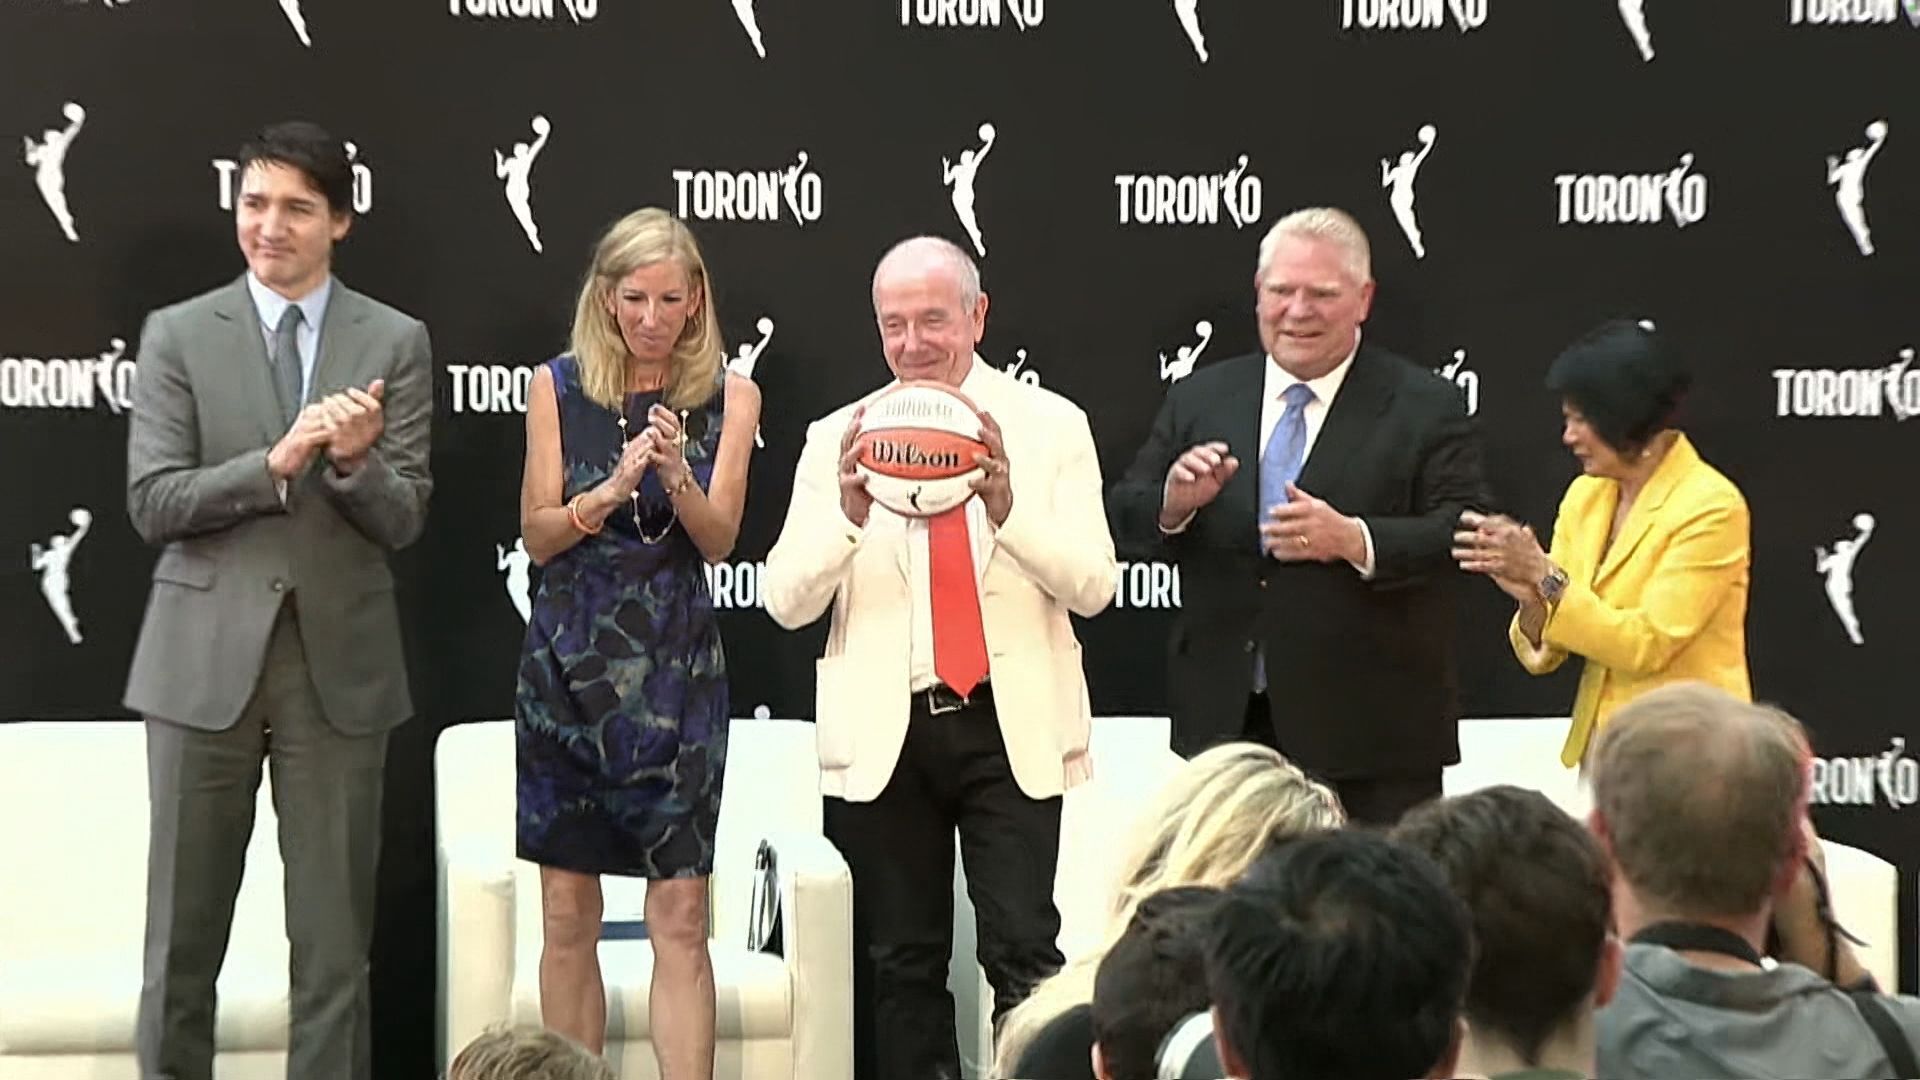 WNBA Expansion a historic moment for Canadians